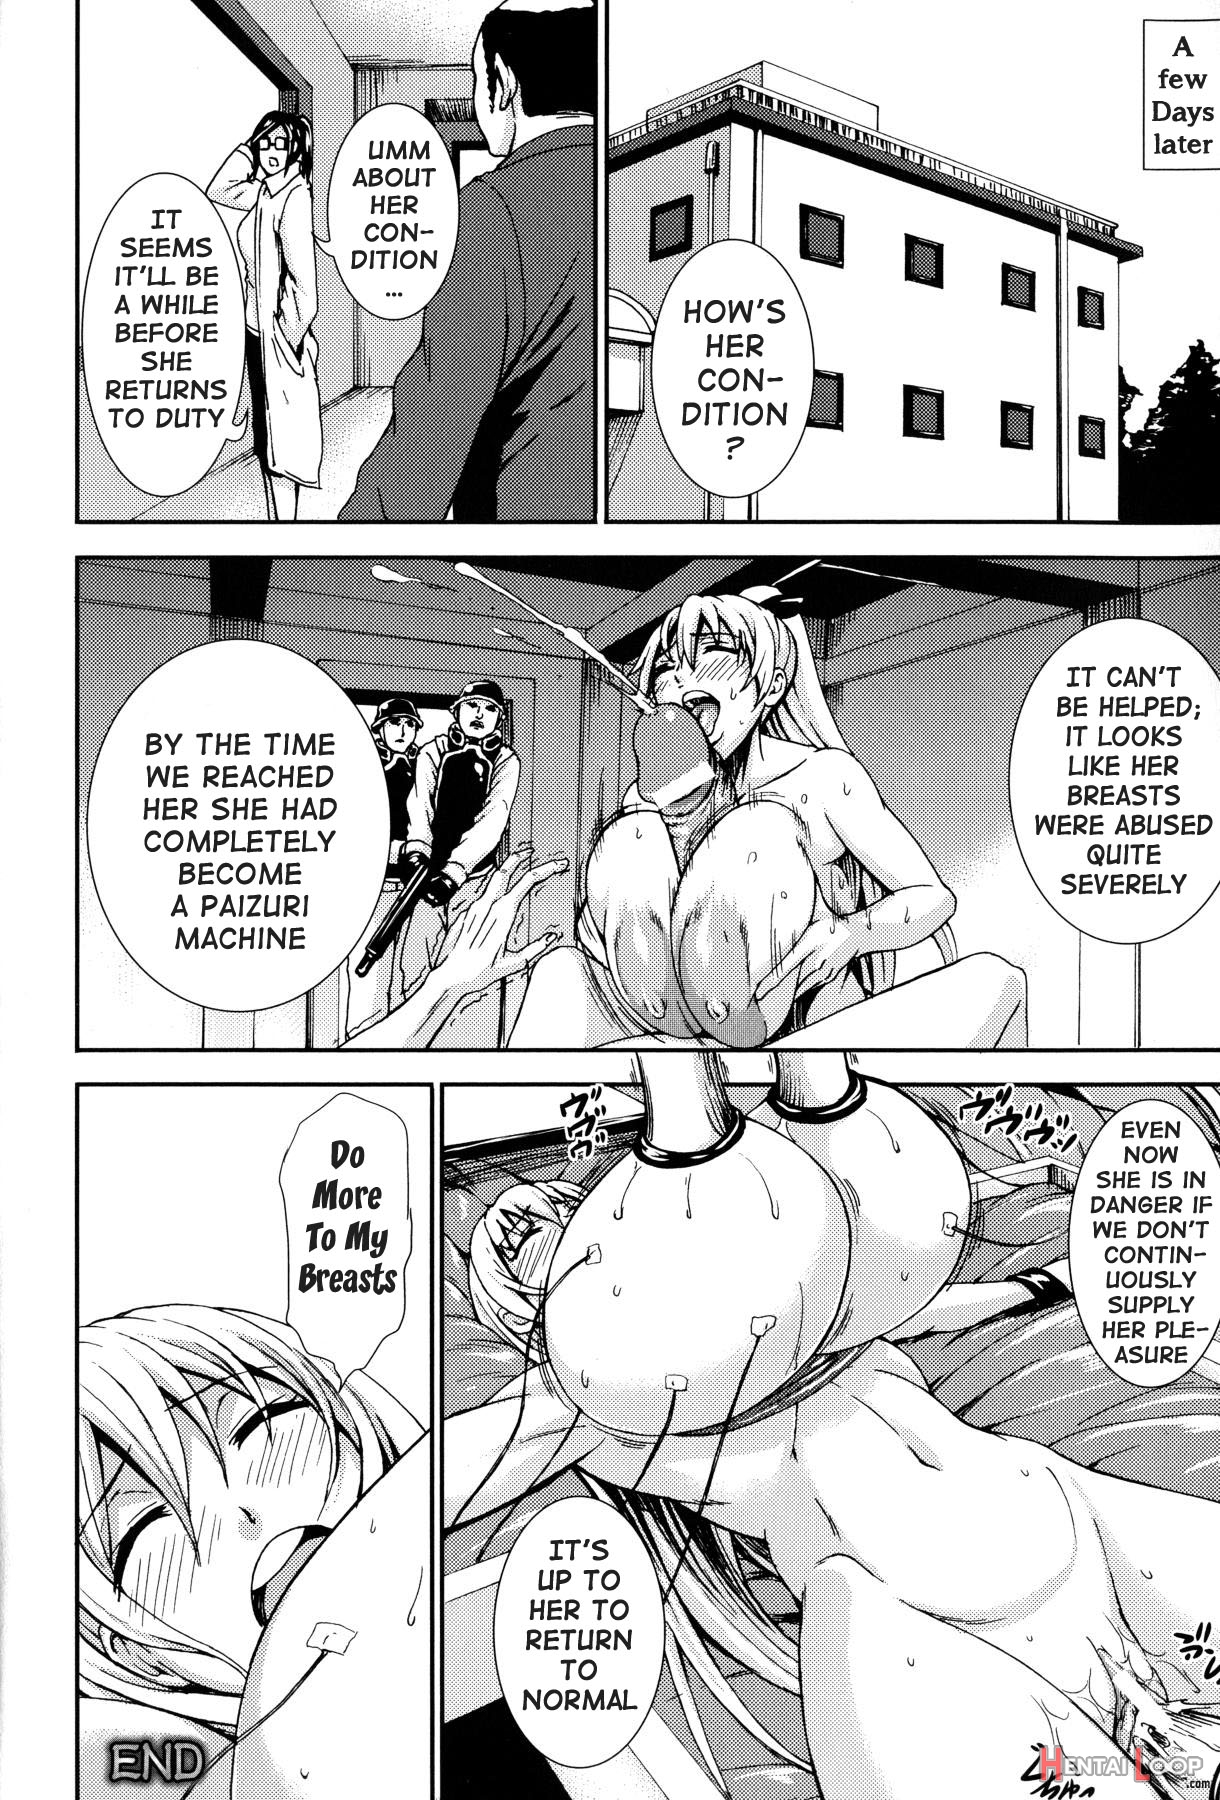 Desirable Breasts page 44